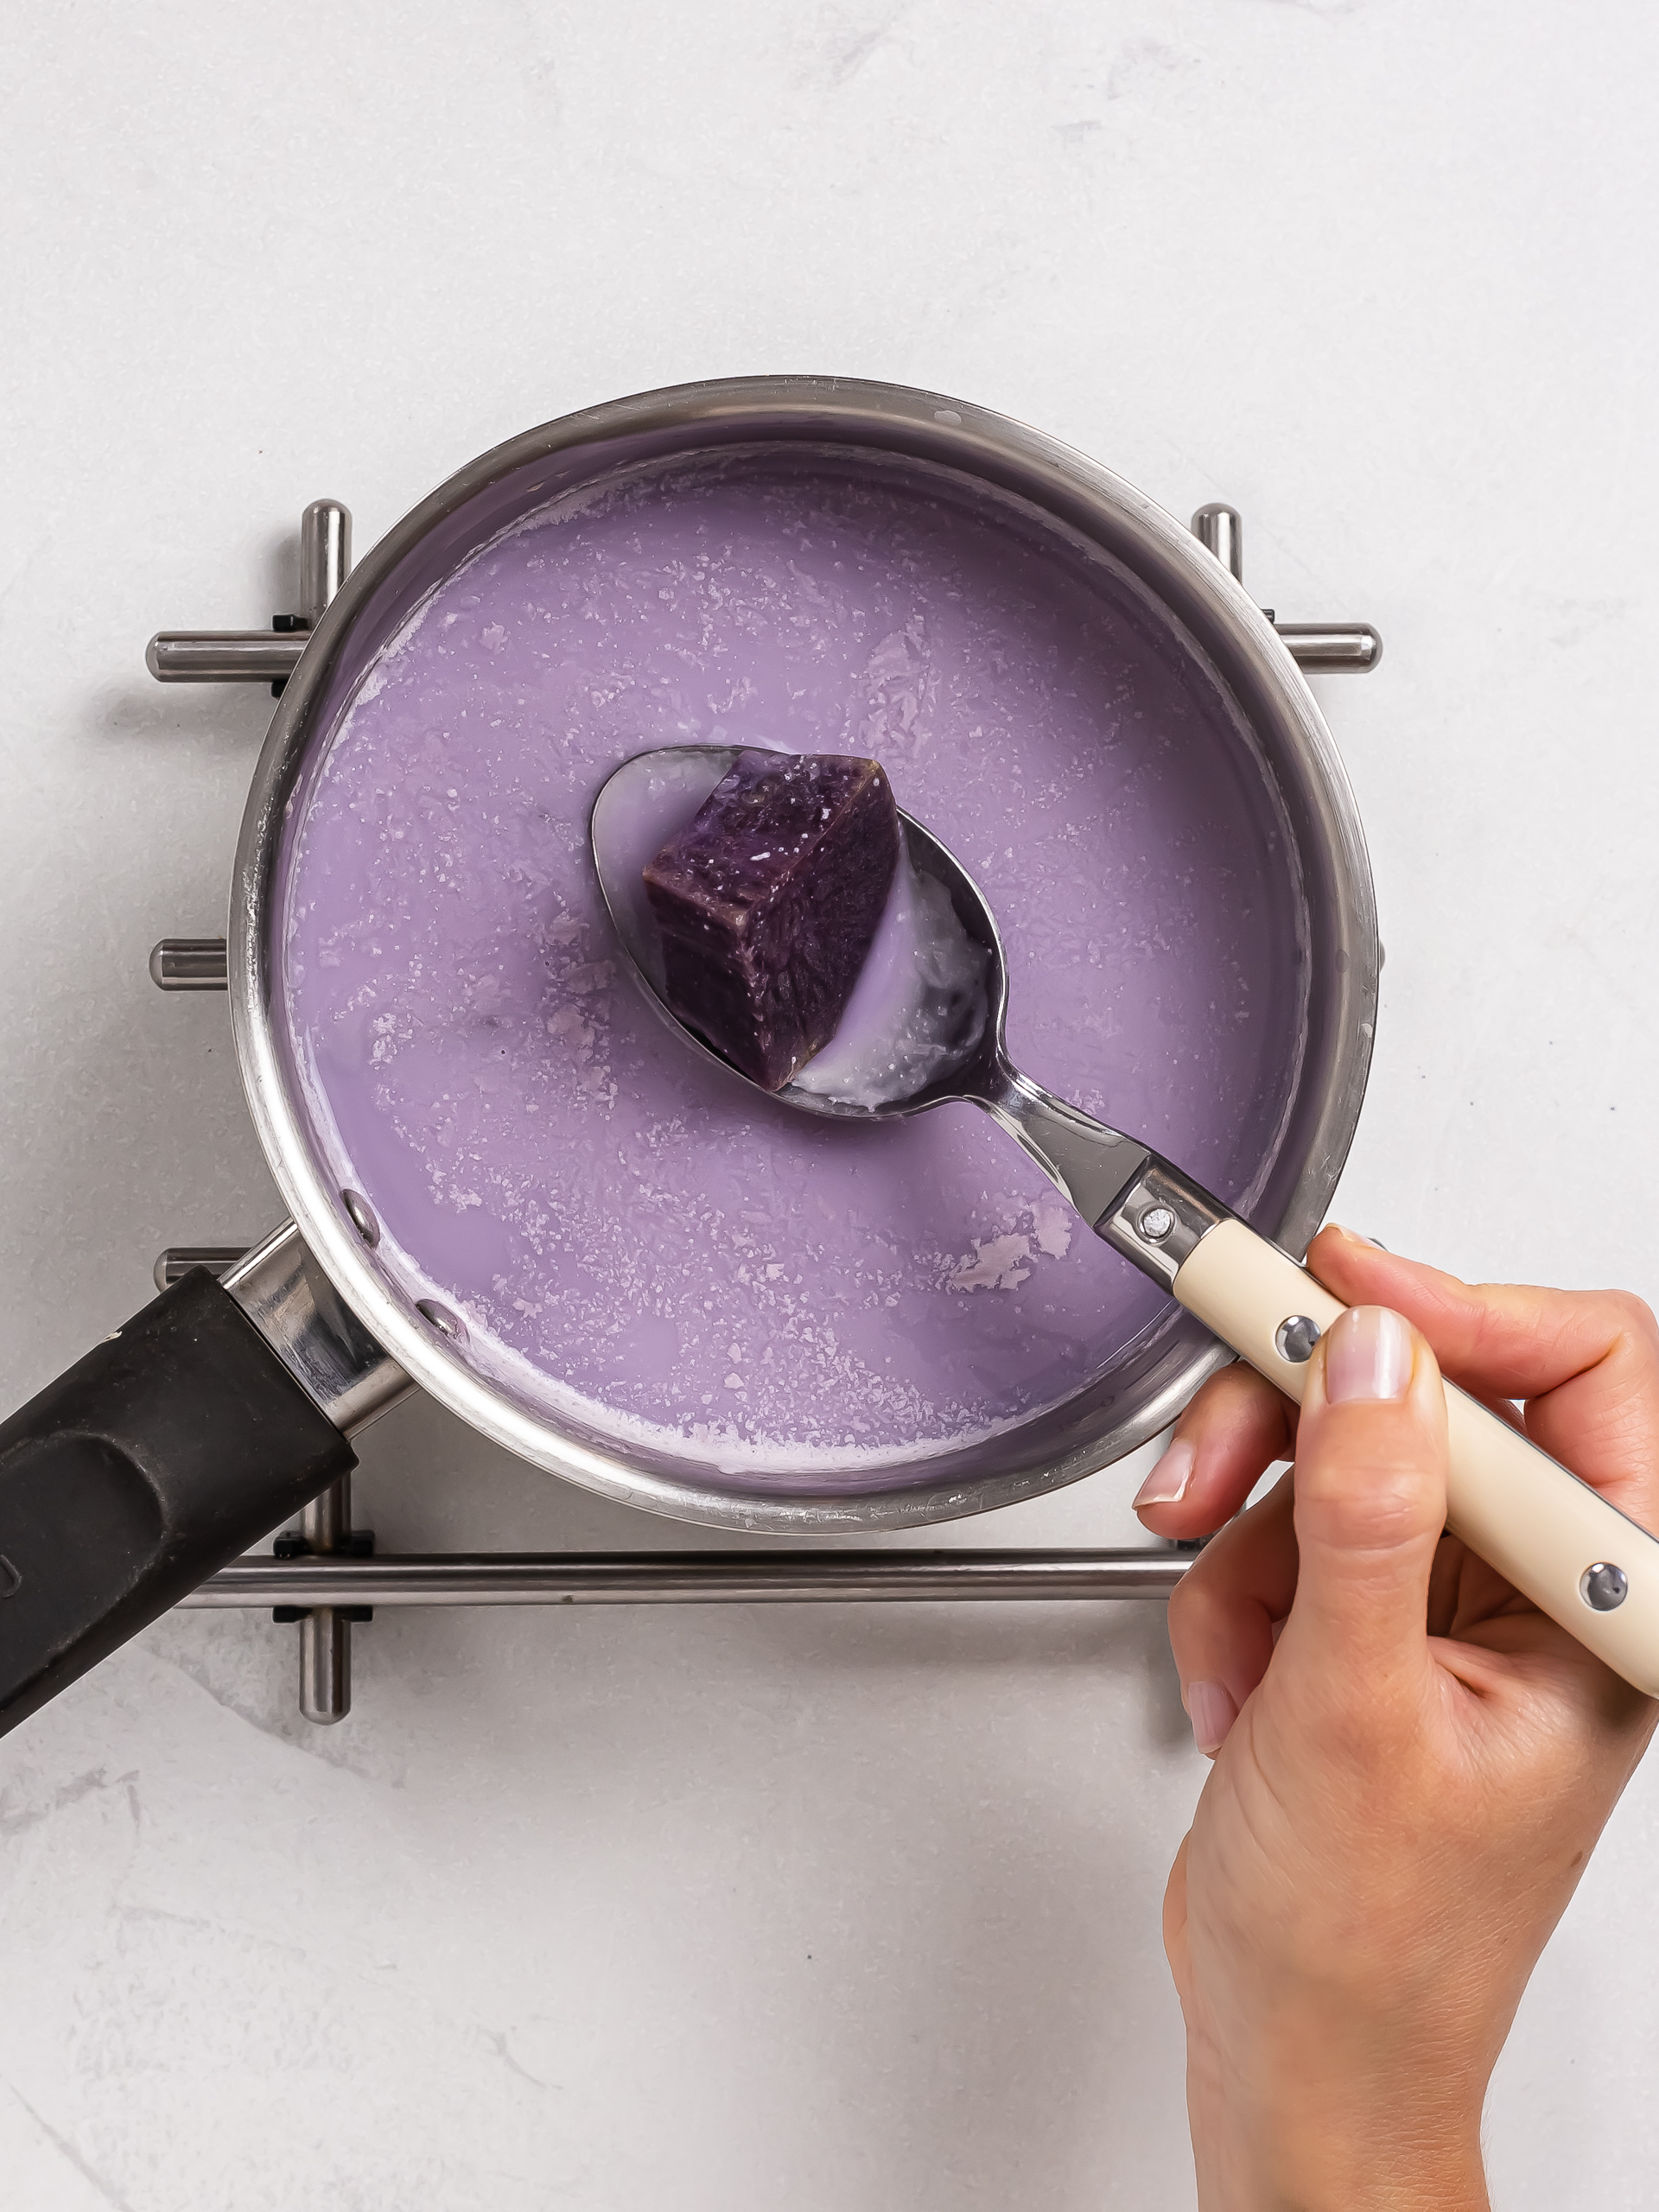 cooking ube with milk in a pot